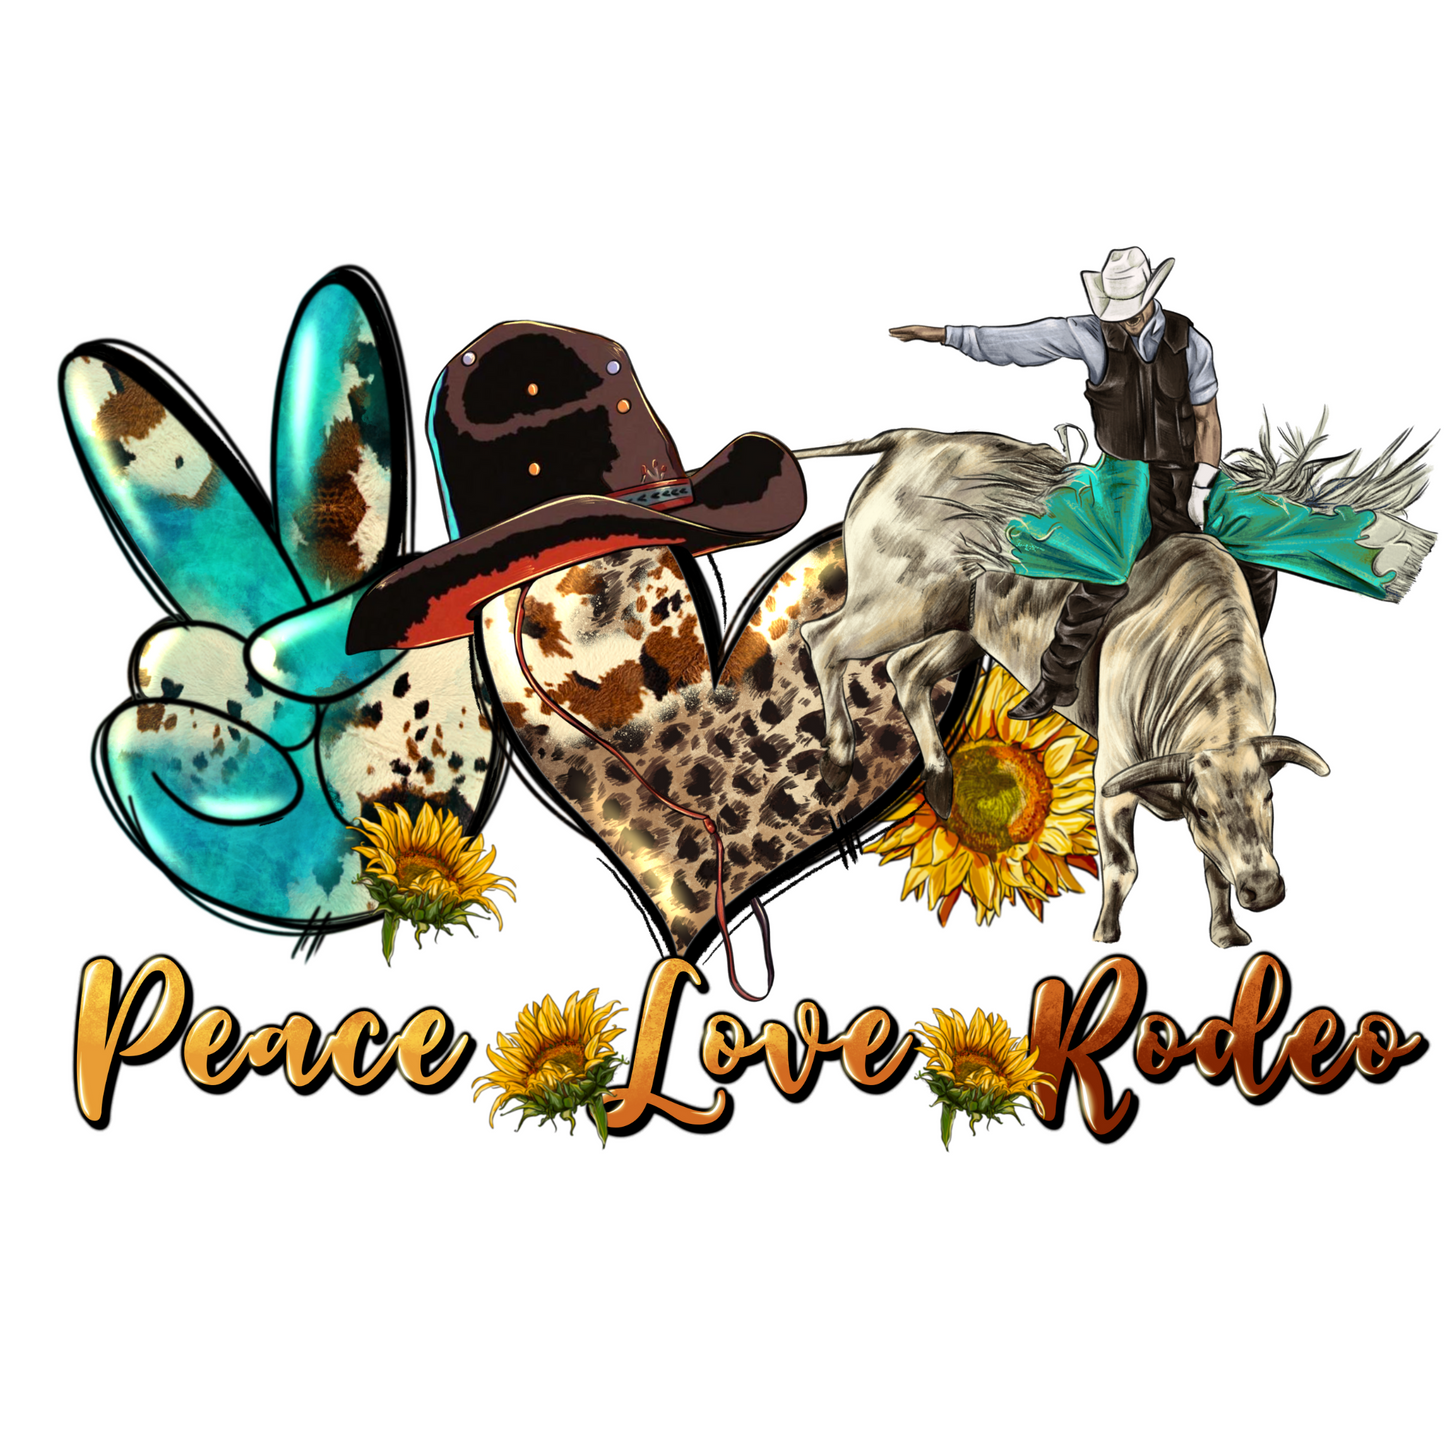 Peace Love Rodeo UV Decal 4 x 5.5 inches